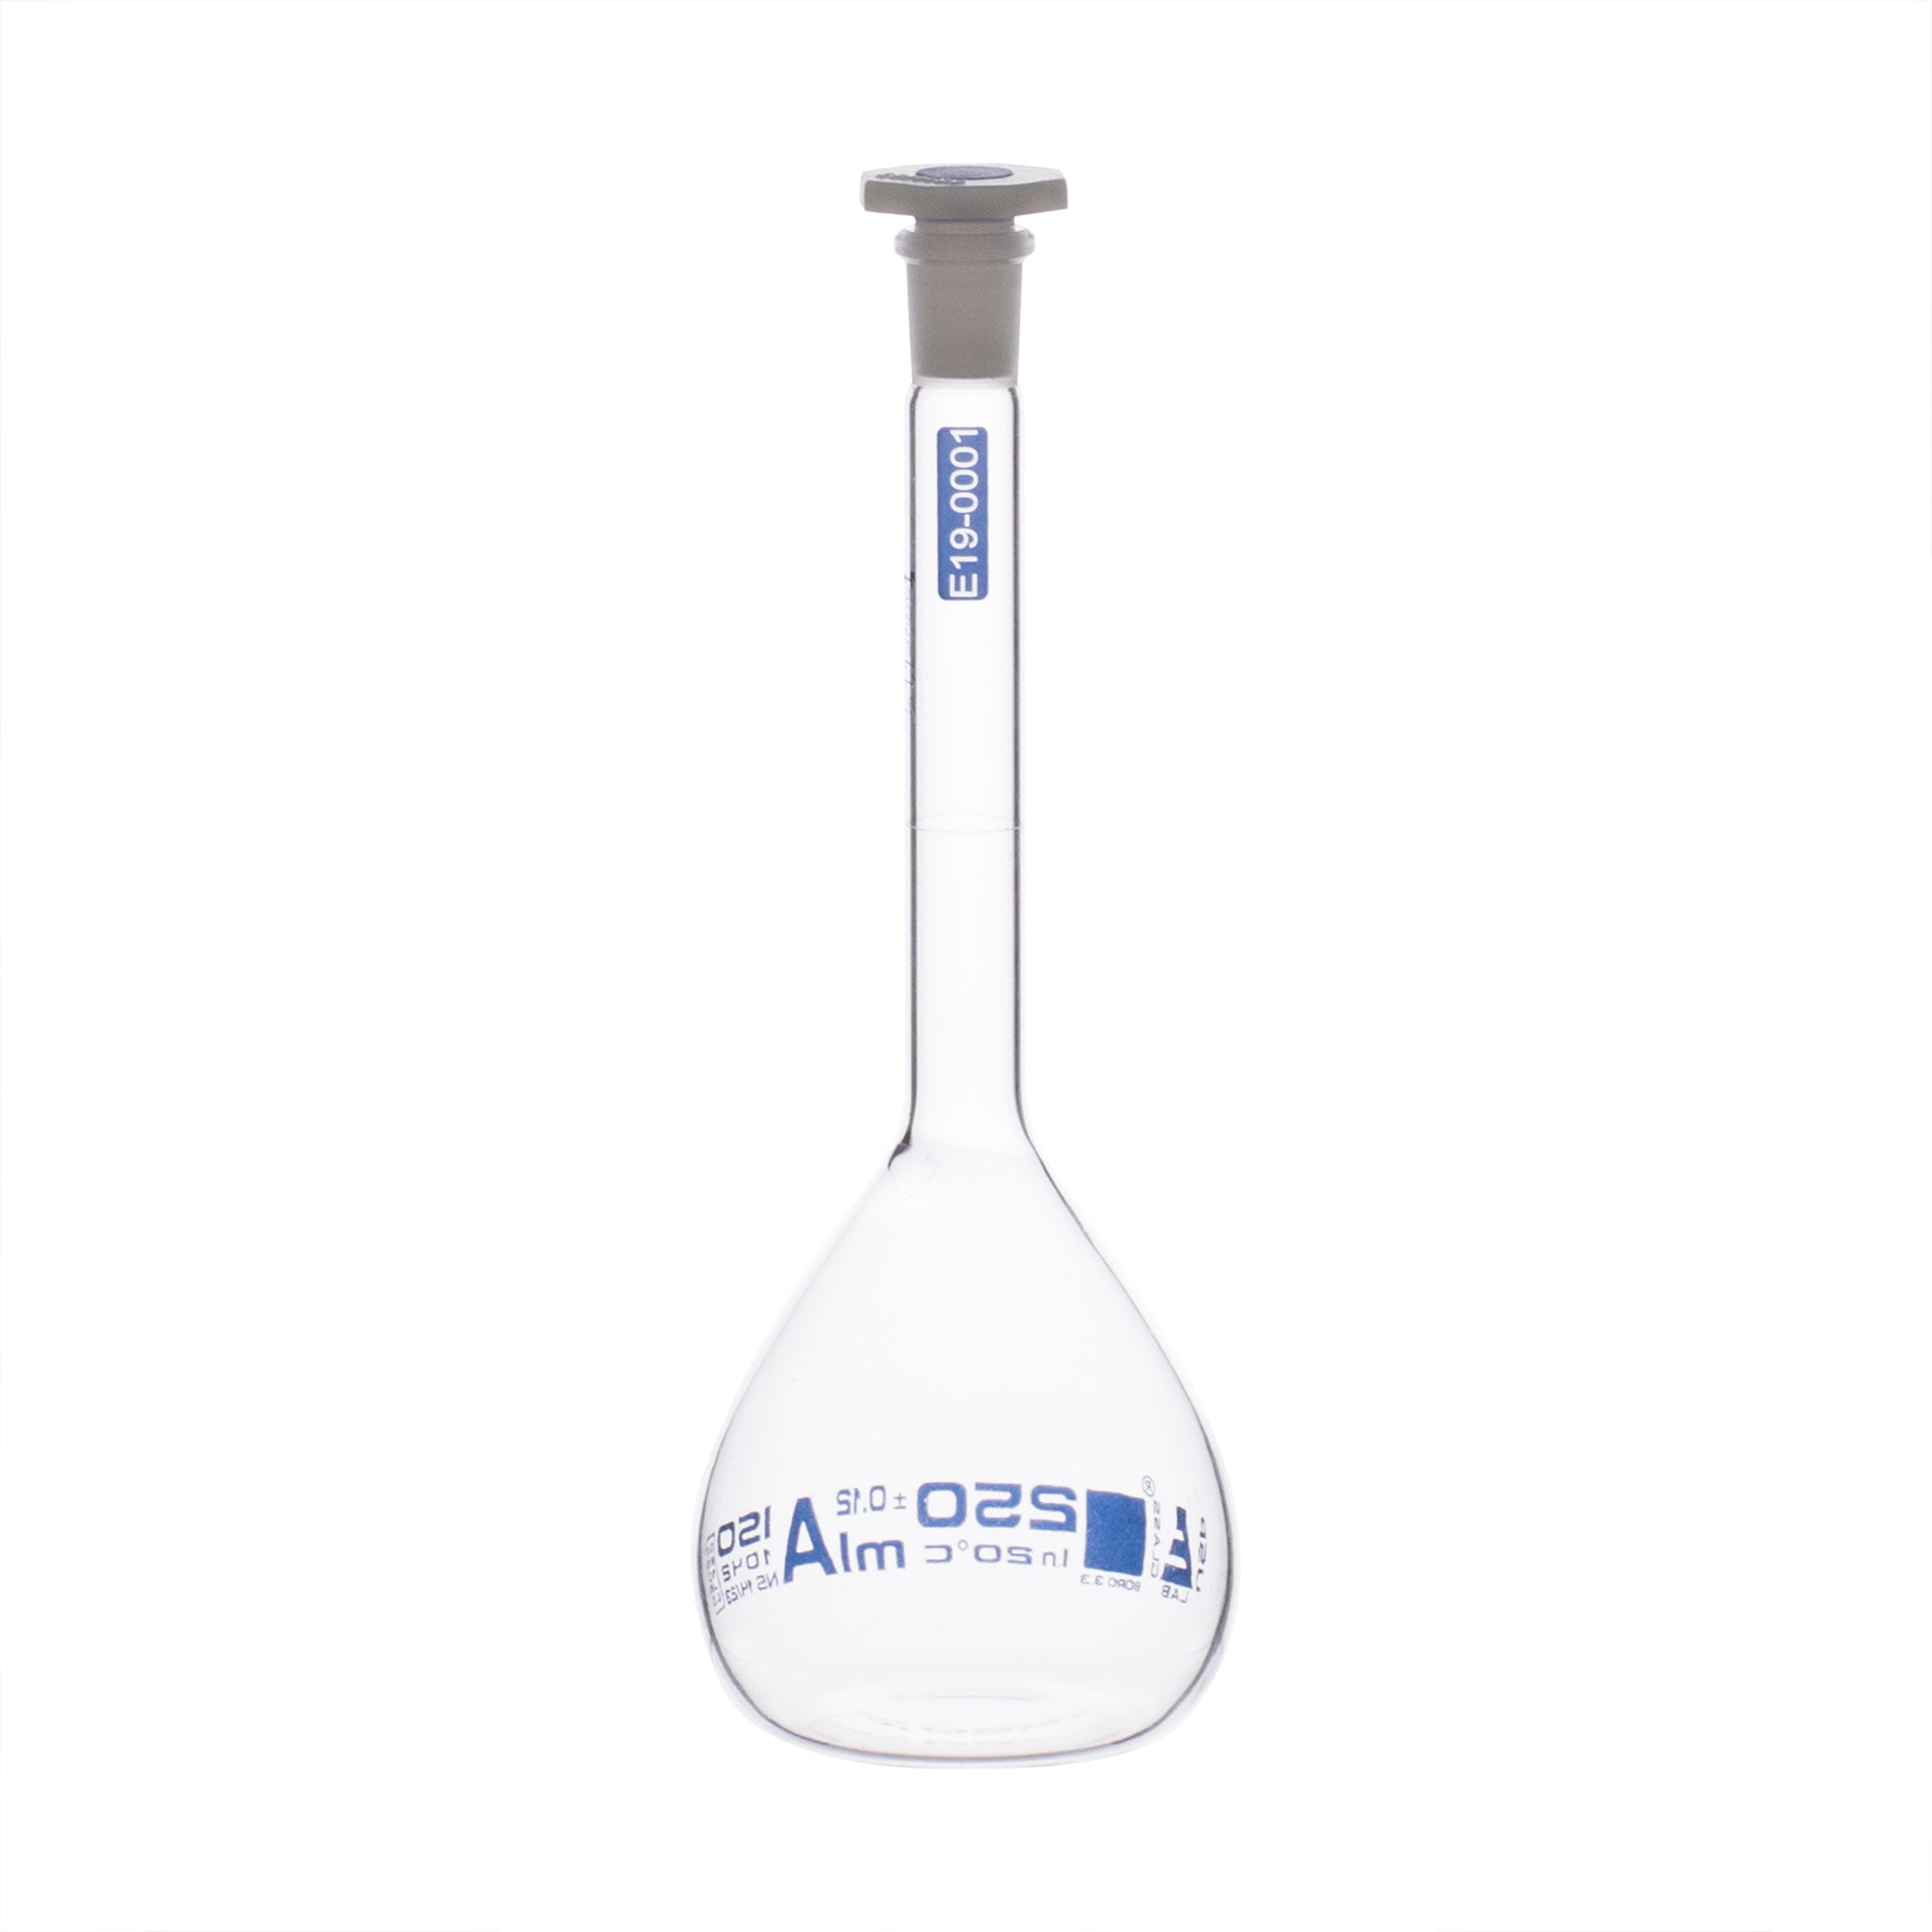 Borosilicate Glass Volumetric Flask with Solid Glass Stopper, 250 ml, USP Class A with Individual Work Certificate,  Pack of 2, Autoclavable